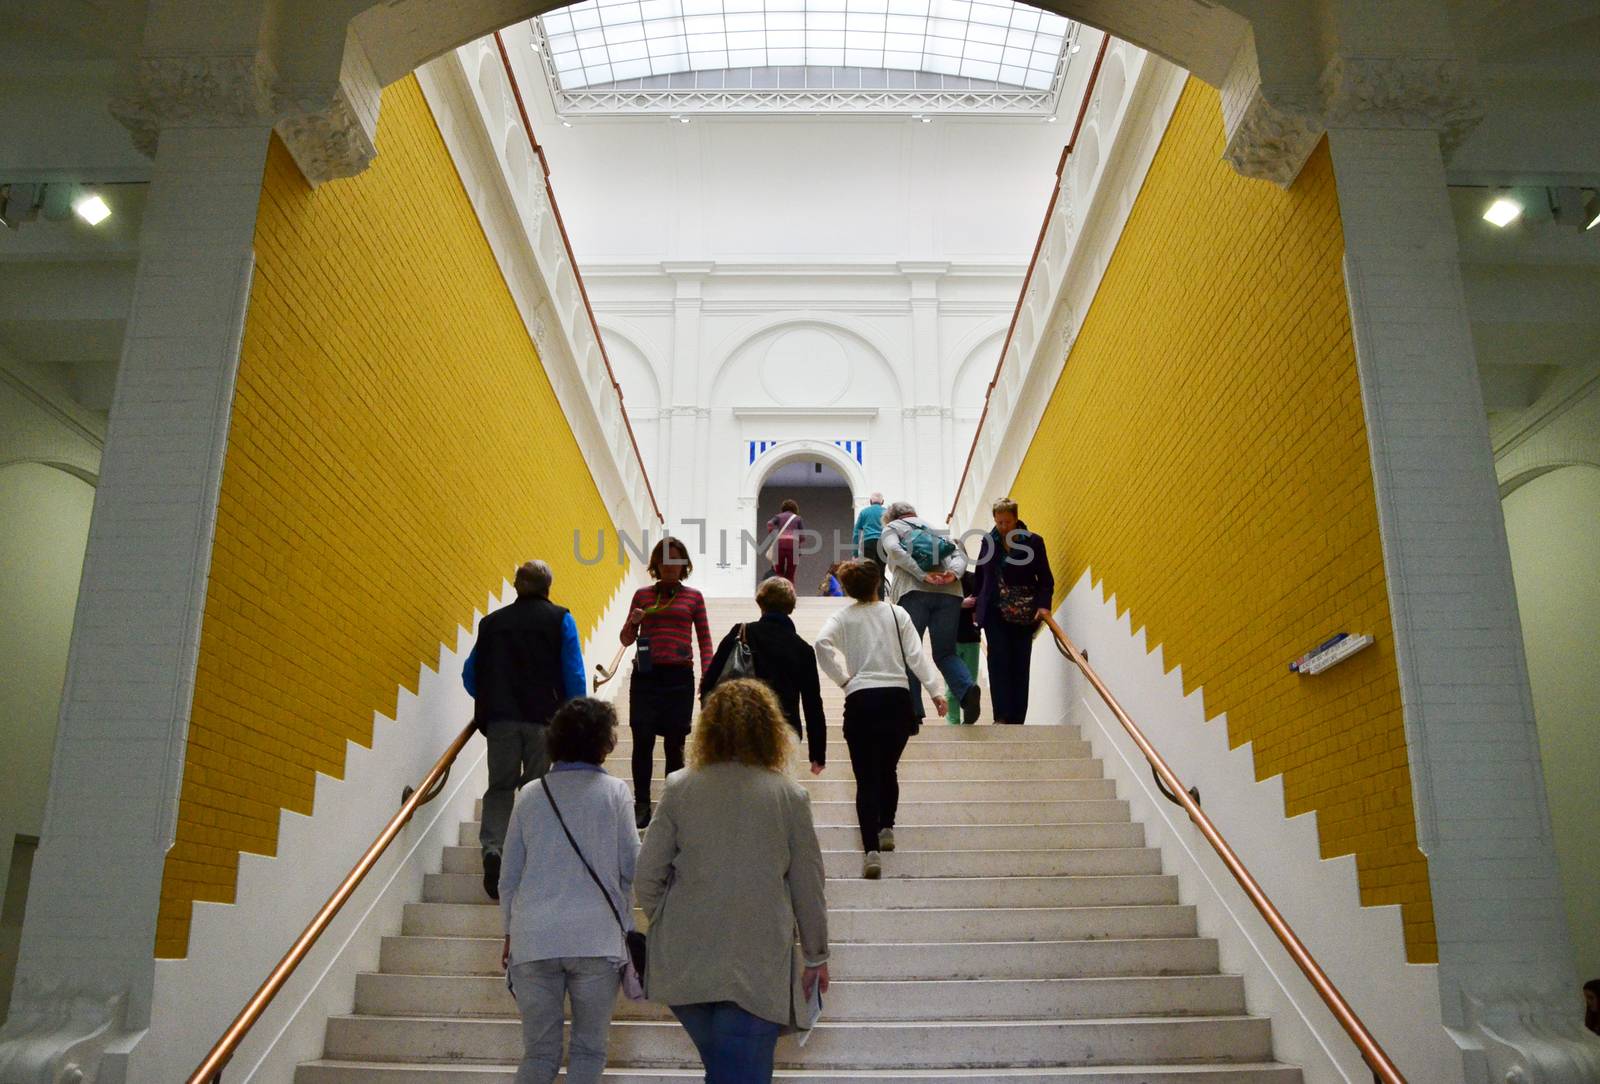 Amsterdam, Netherlands - May 6, 2015: People visit Stedelijk Museum in Amsterdam by siraanamwong